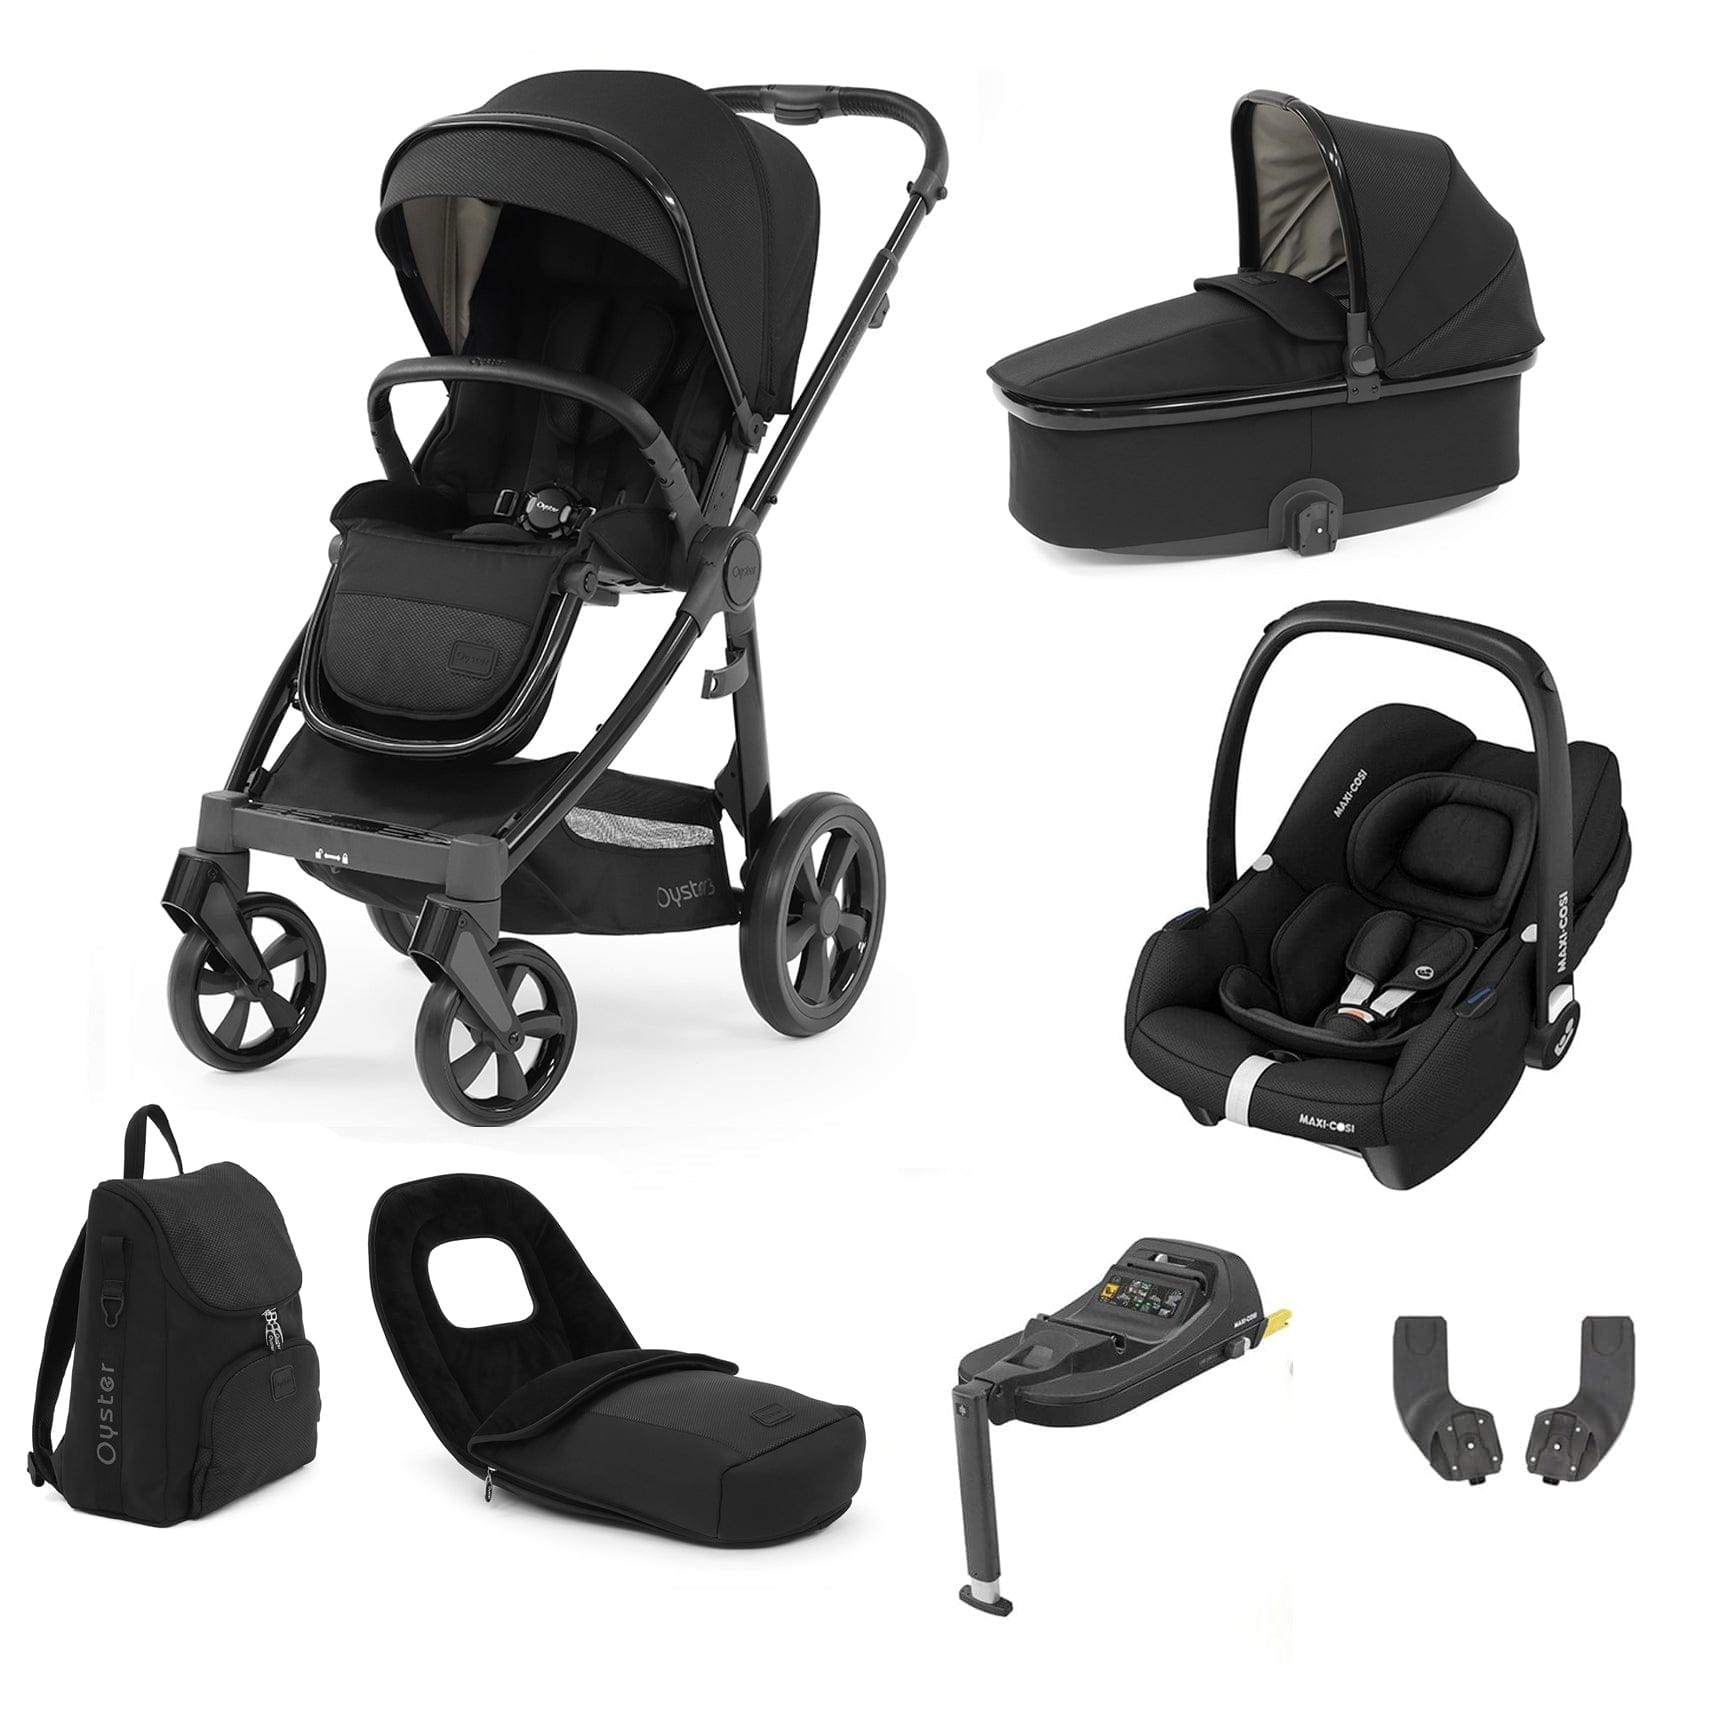 BabyStyle travel systems Babystyle Oyster 3 Luxury 7 Piece with Car Seat Bundle in Pixel 14815-PXL